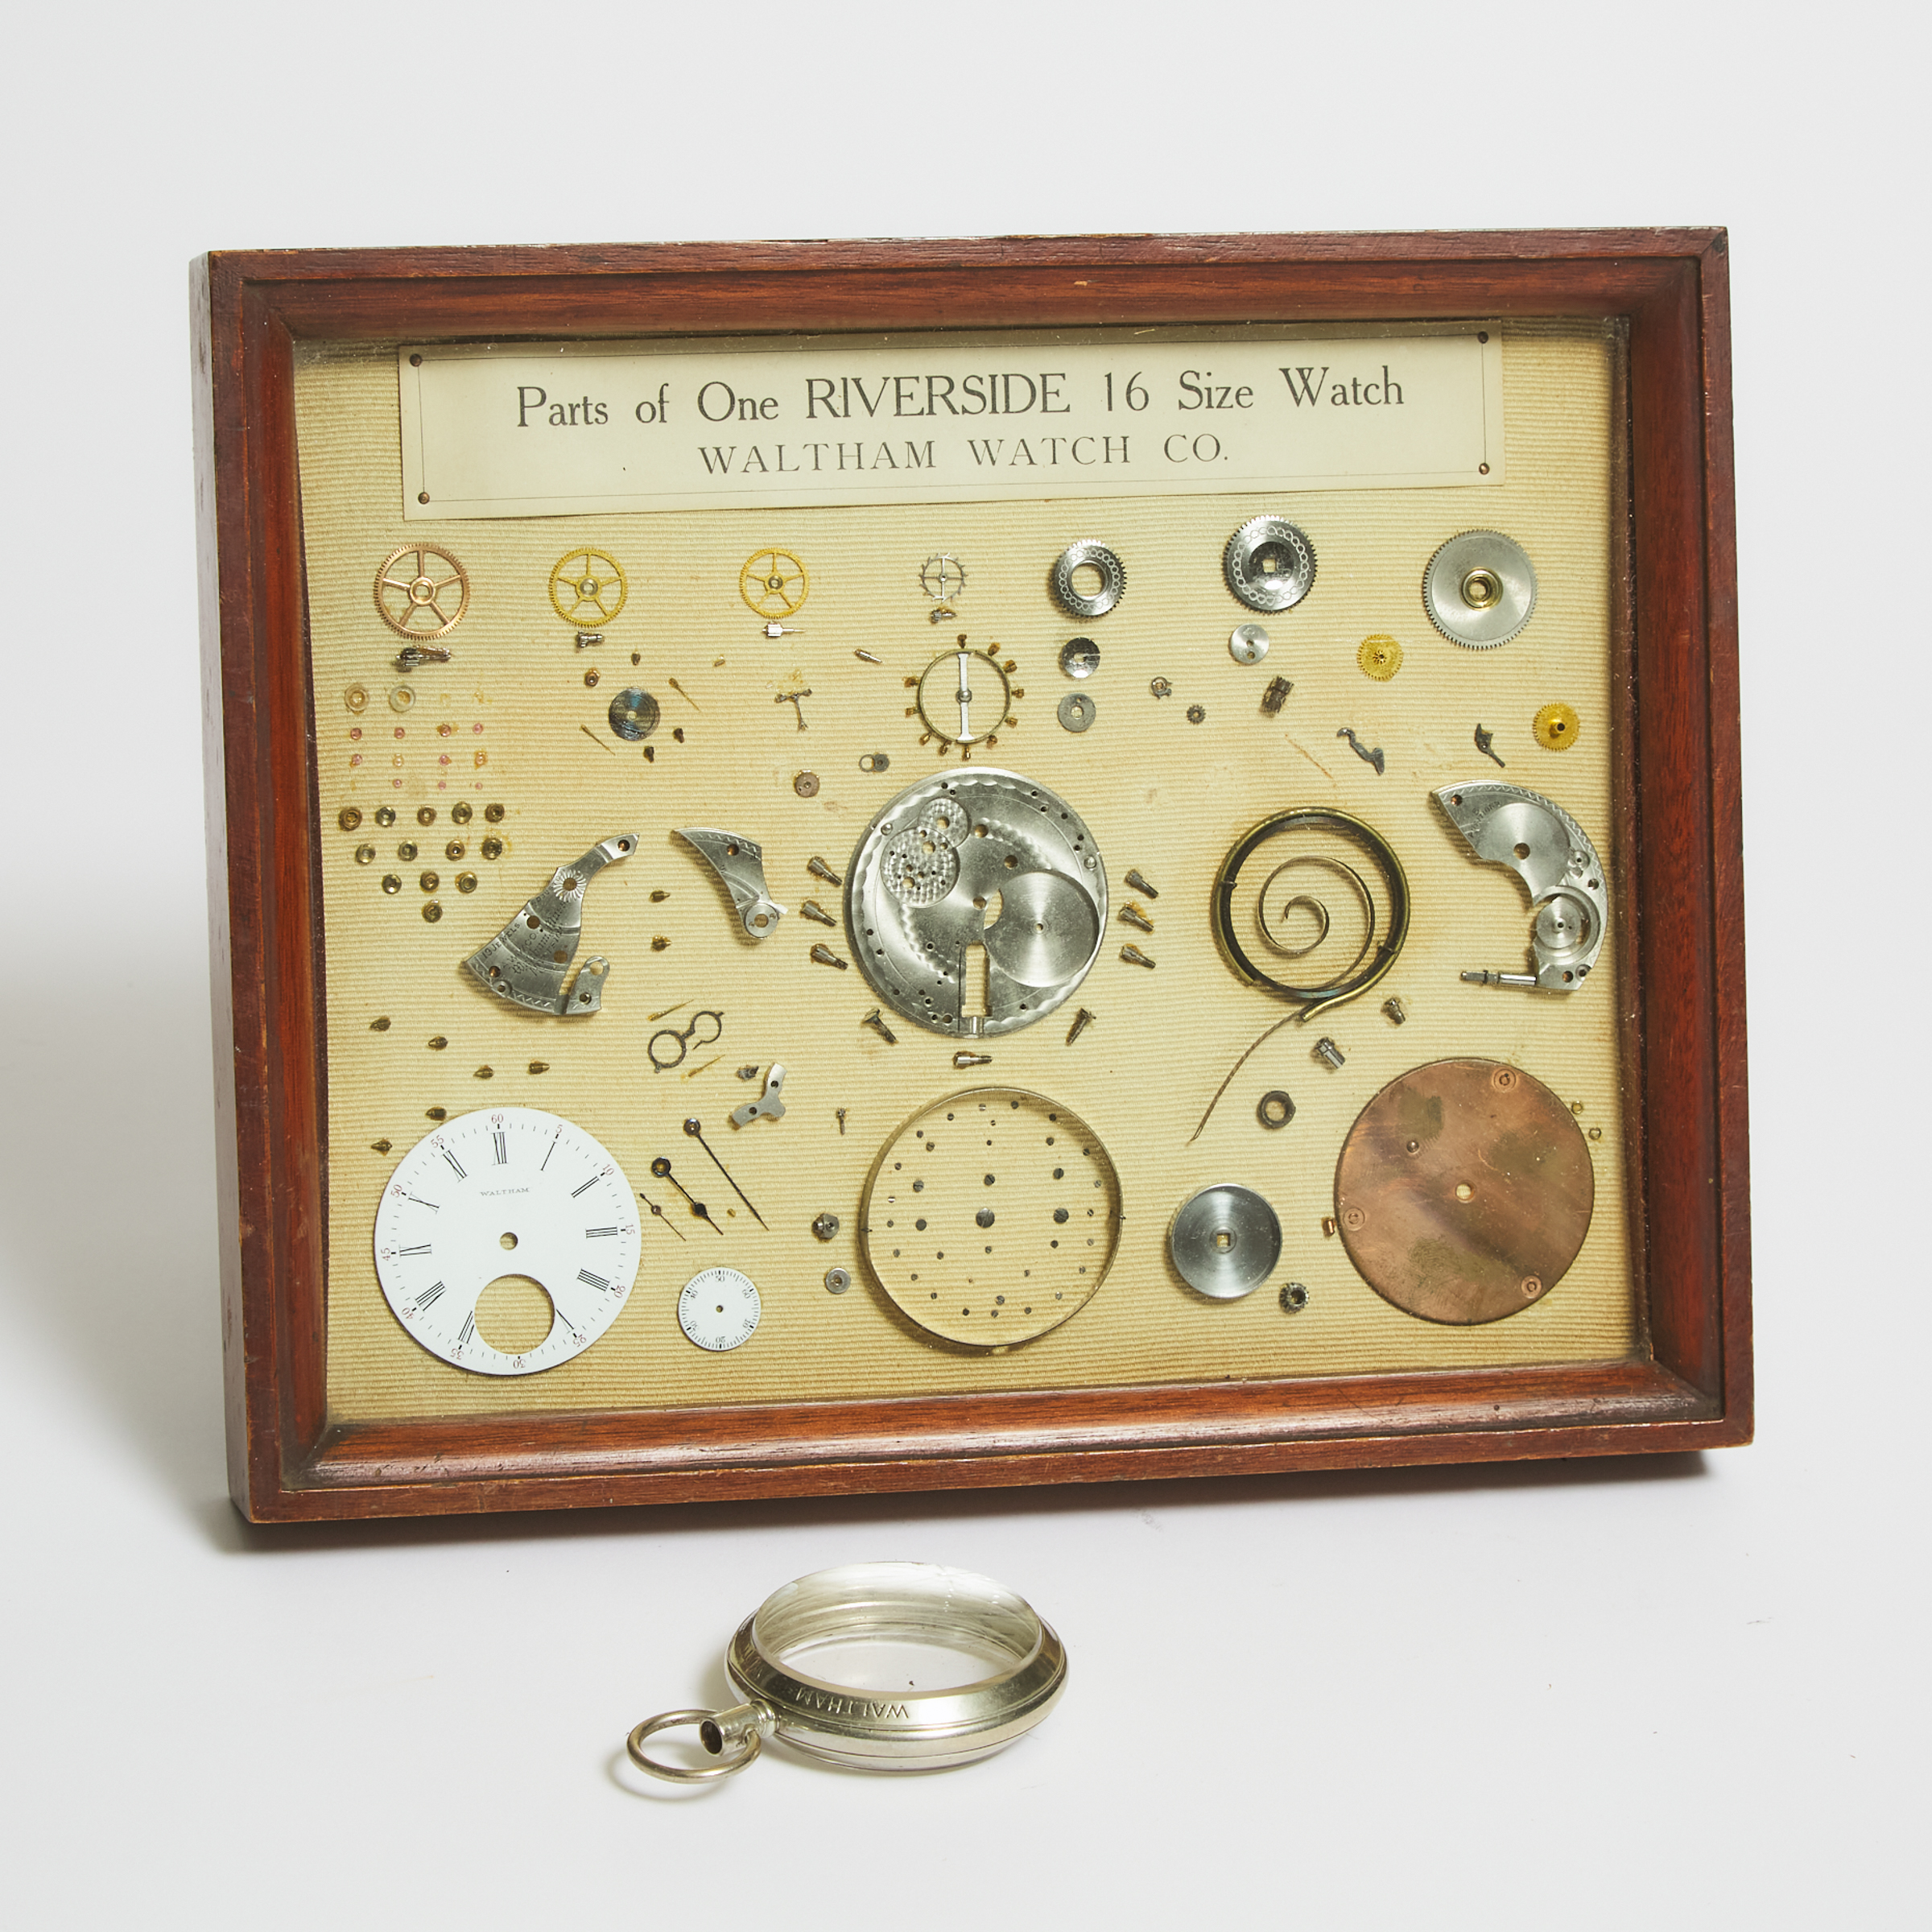 Waltham Watch Company Promotional Framed Riverside 16 Size Pocket Watch Parts and Case, 19th century